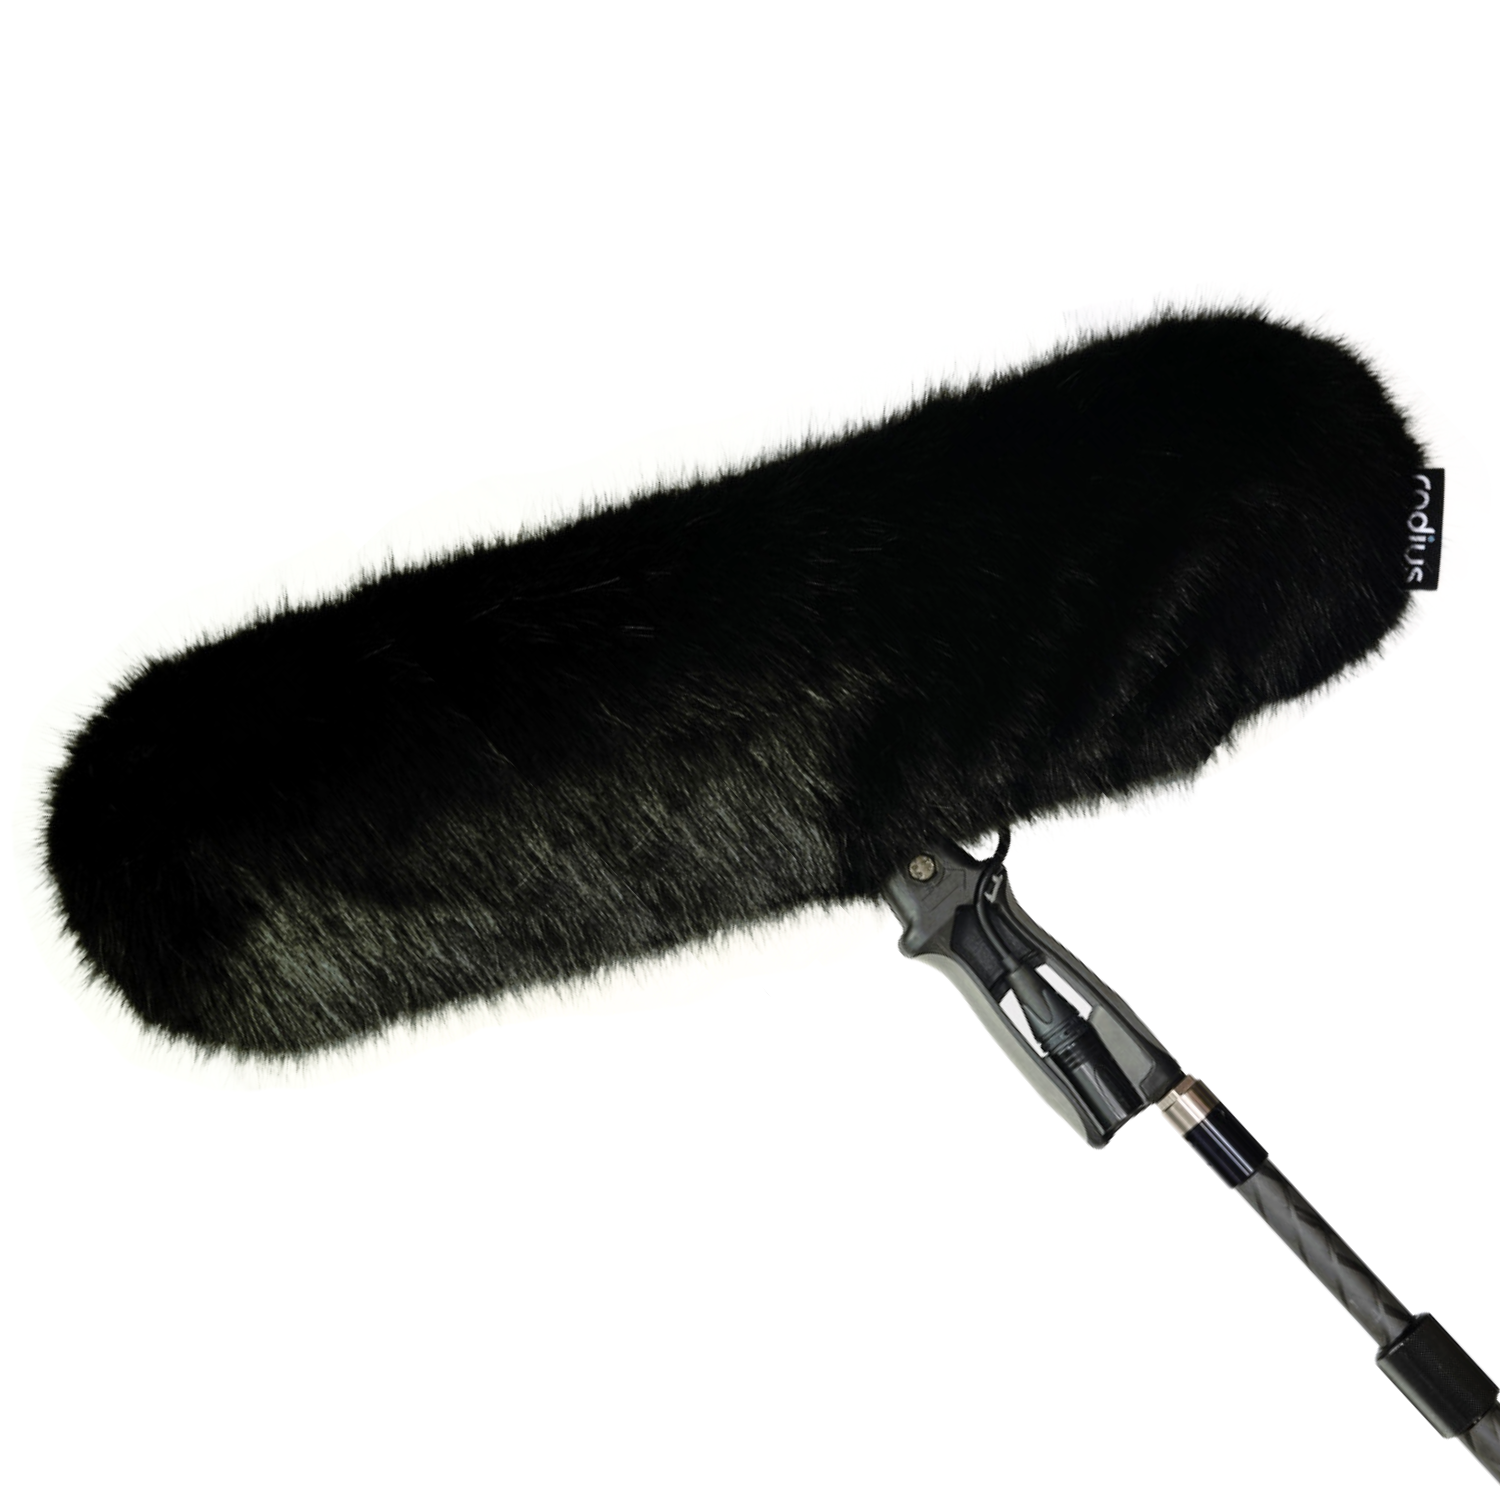 Replacement Windcover for Rycote WS295 Windshield, Black Fur